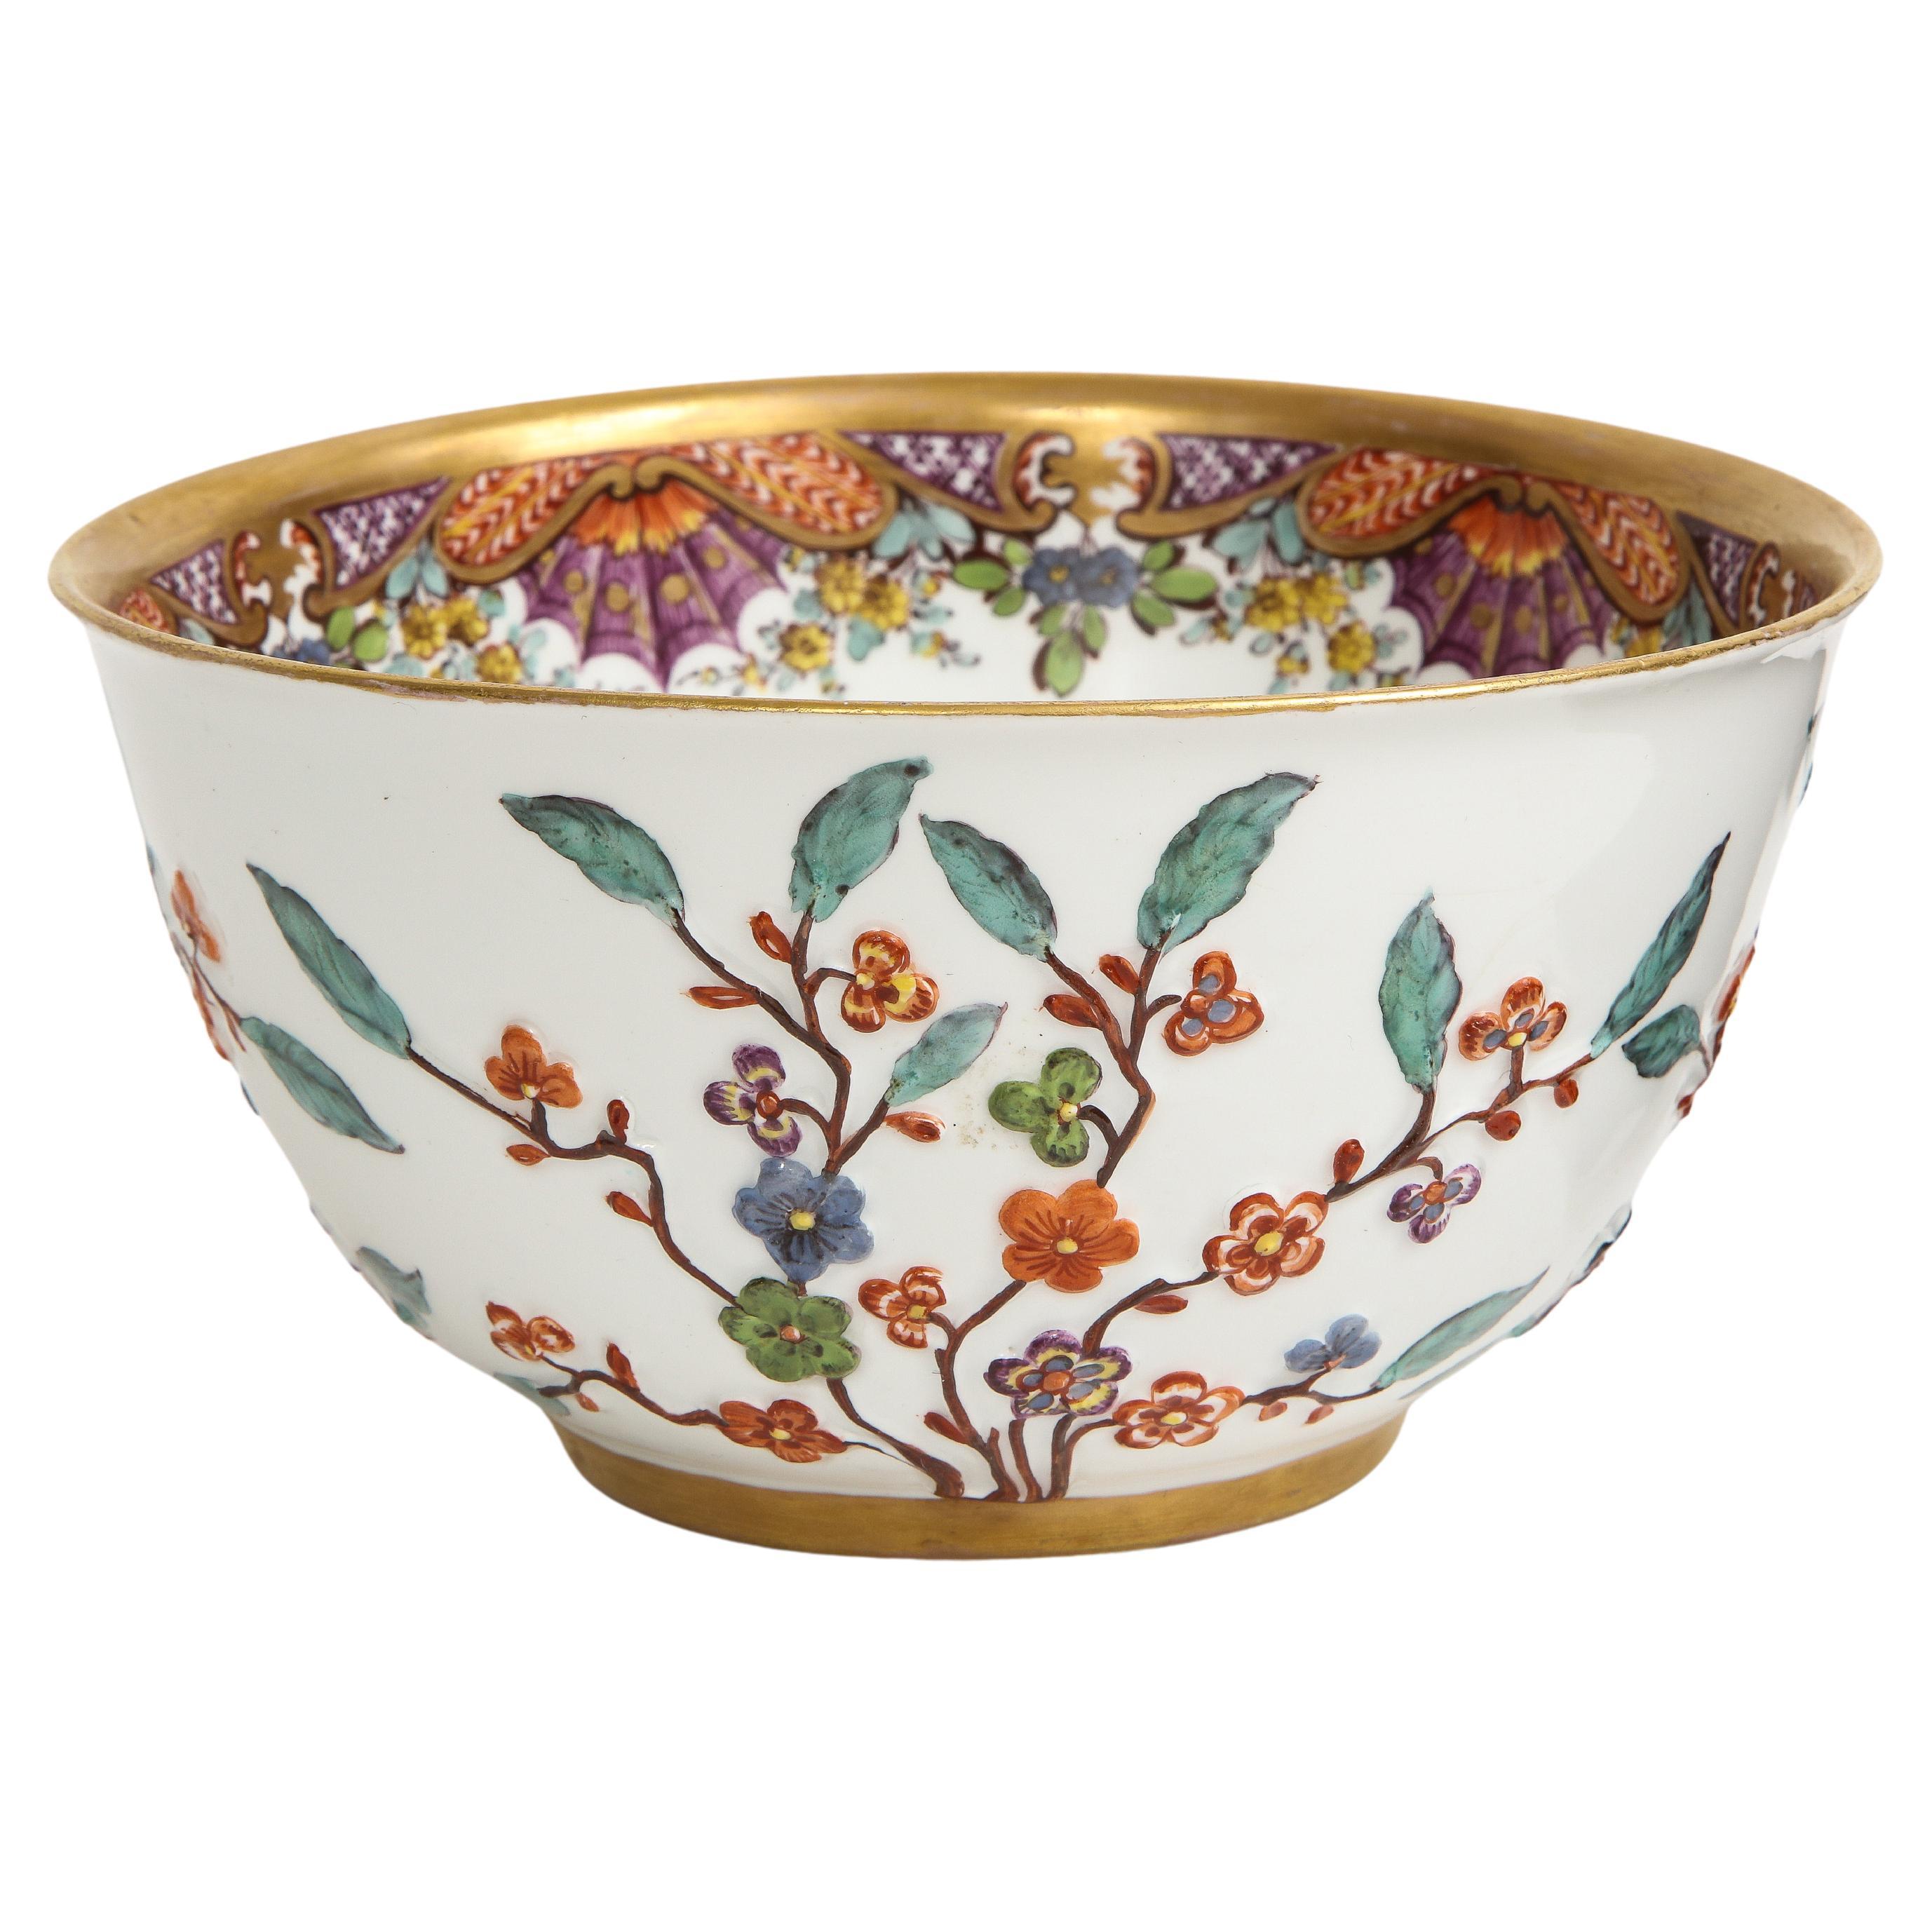 18th C. Meissen Hausmaler Decorated Bowl with High Relief Multi-Colored Flowers